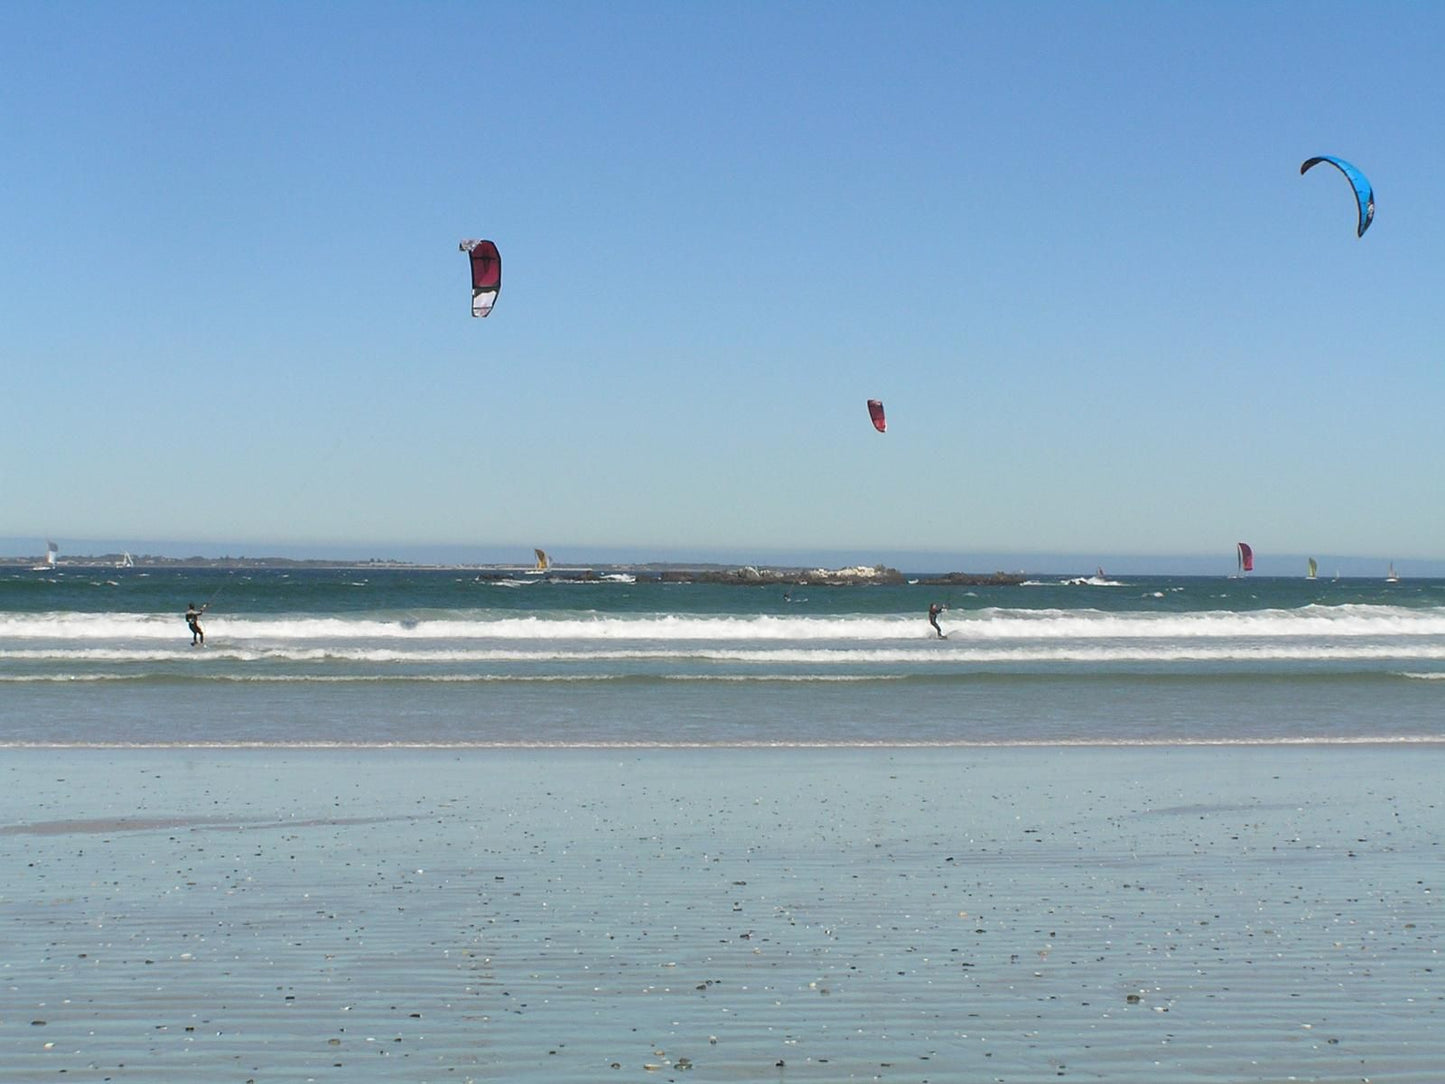 Small Bay Guest House Bloubergstrand Blouberg Western Cape South Africa Beach, Nature, Sand, Sky, Surfboard, Water Sport, Kitesurfing, Funsport, Sport, Waters